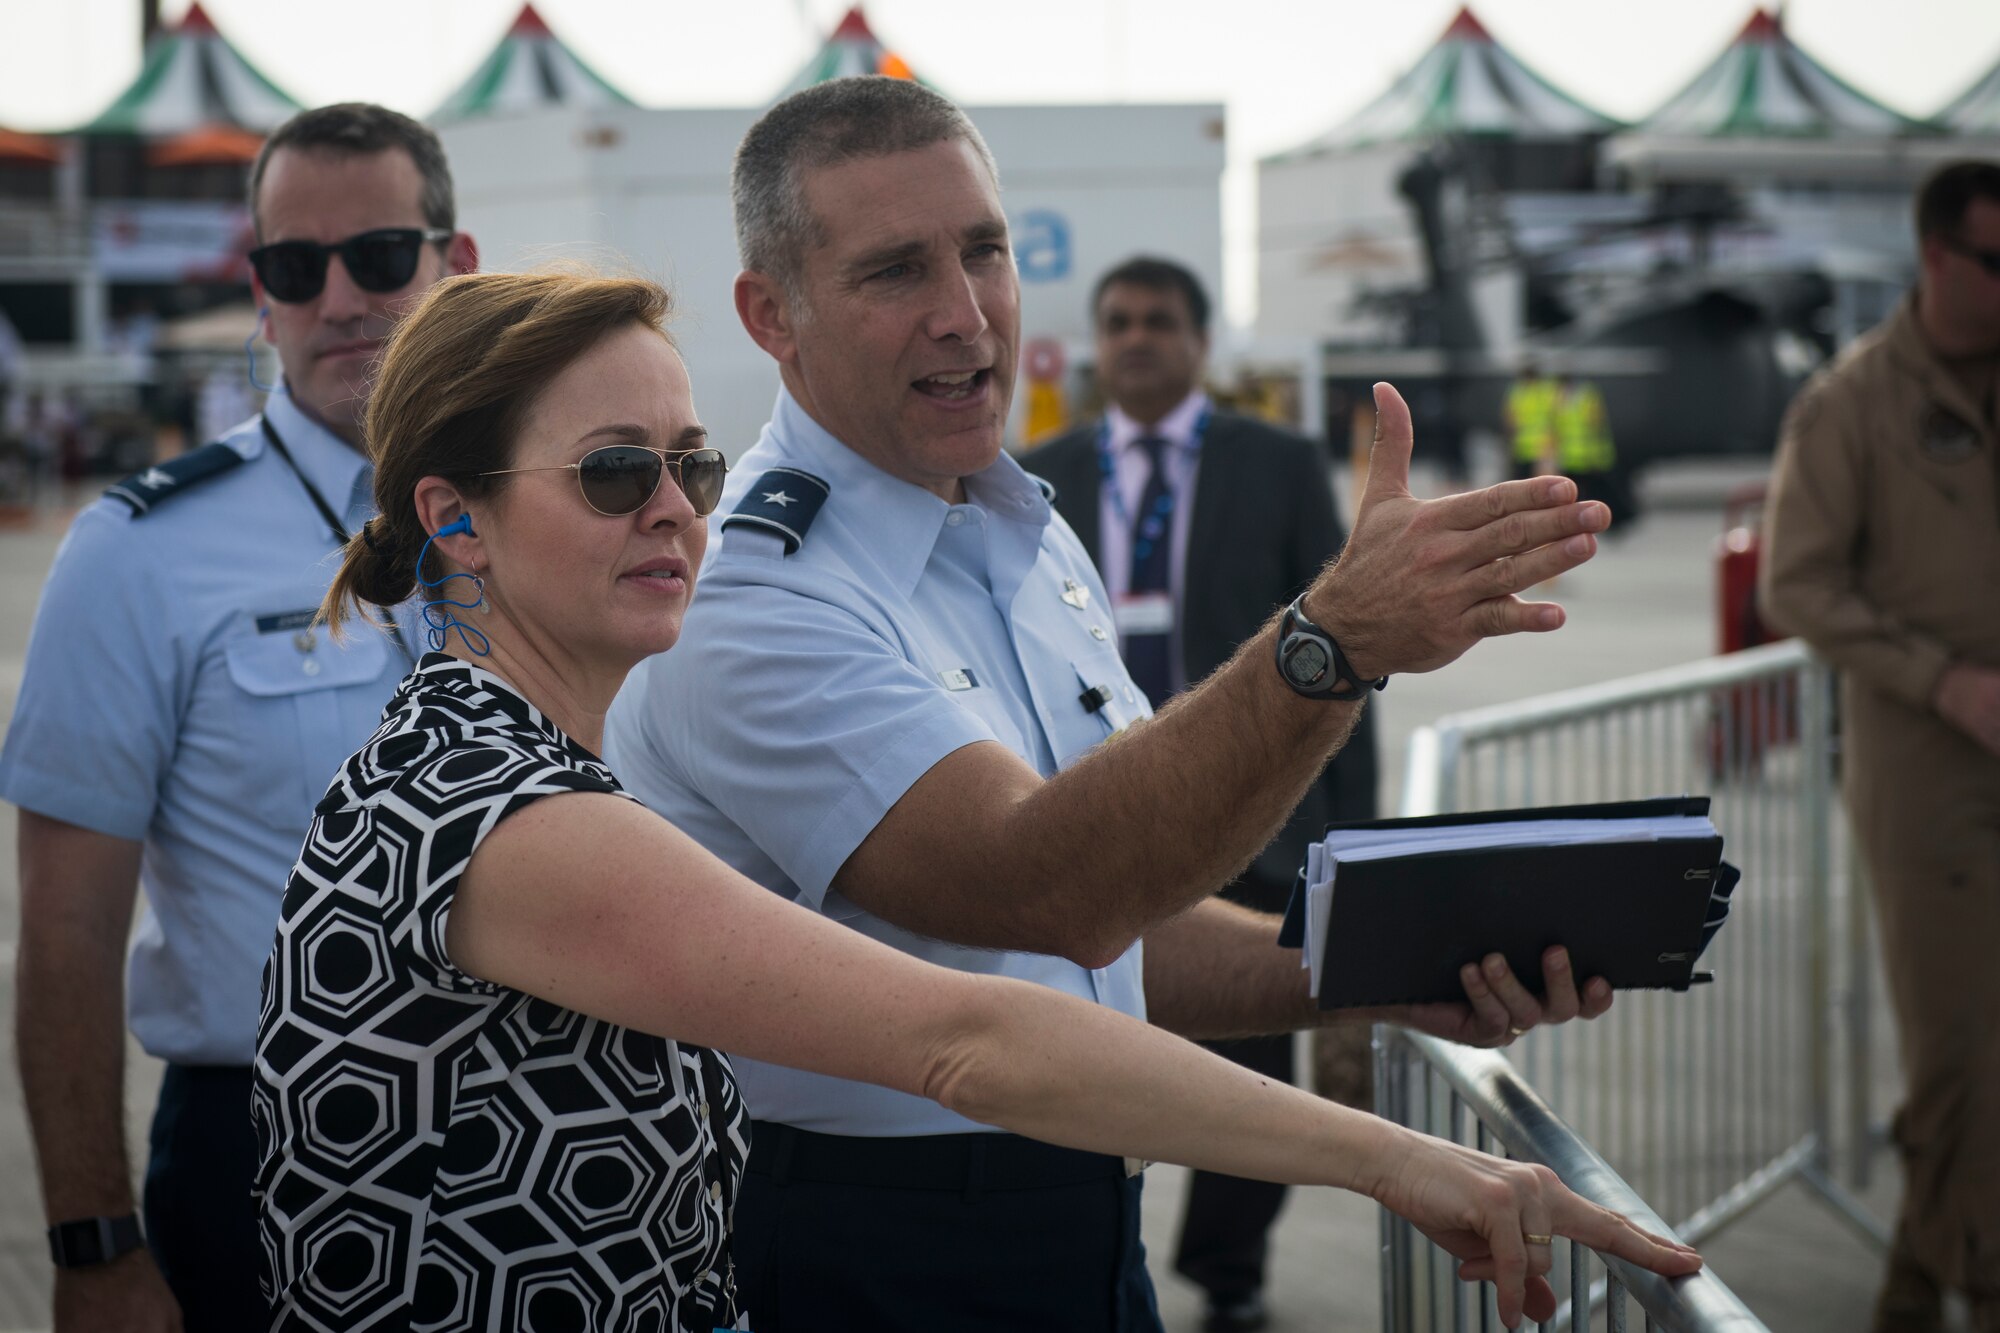 U.S. Air Force Brig. Gen. Matthew Isler, center, the Director of Regional Affairs for the Deputy Under Secretary of the Air Force, International Affairs, briefs Kelli Seybolt, center, the Deputy Under Secretary of the Air Force, International Affairs, on U.S. military aircraft capabilities at the Dubai Airshow, United Arab Emirates, on Nov. 18, 2019.